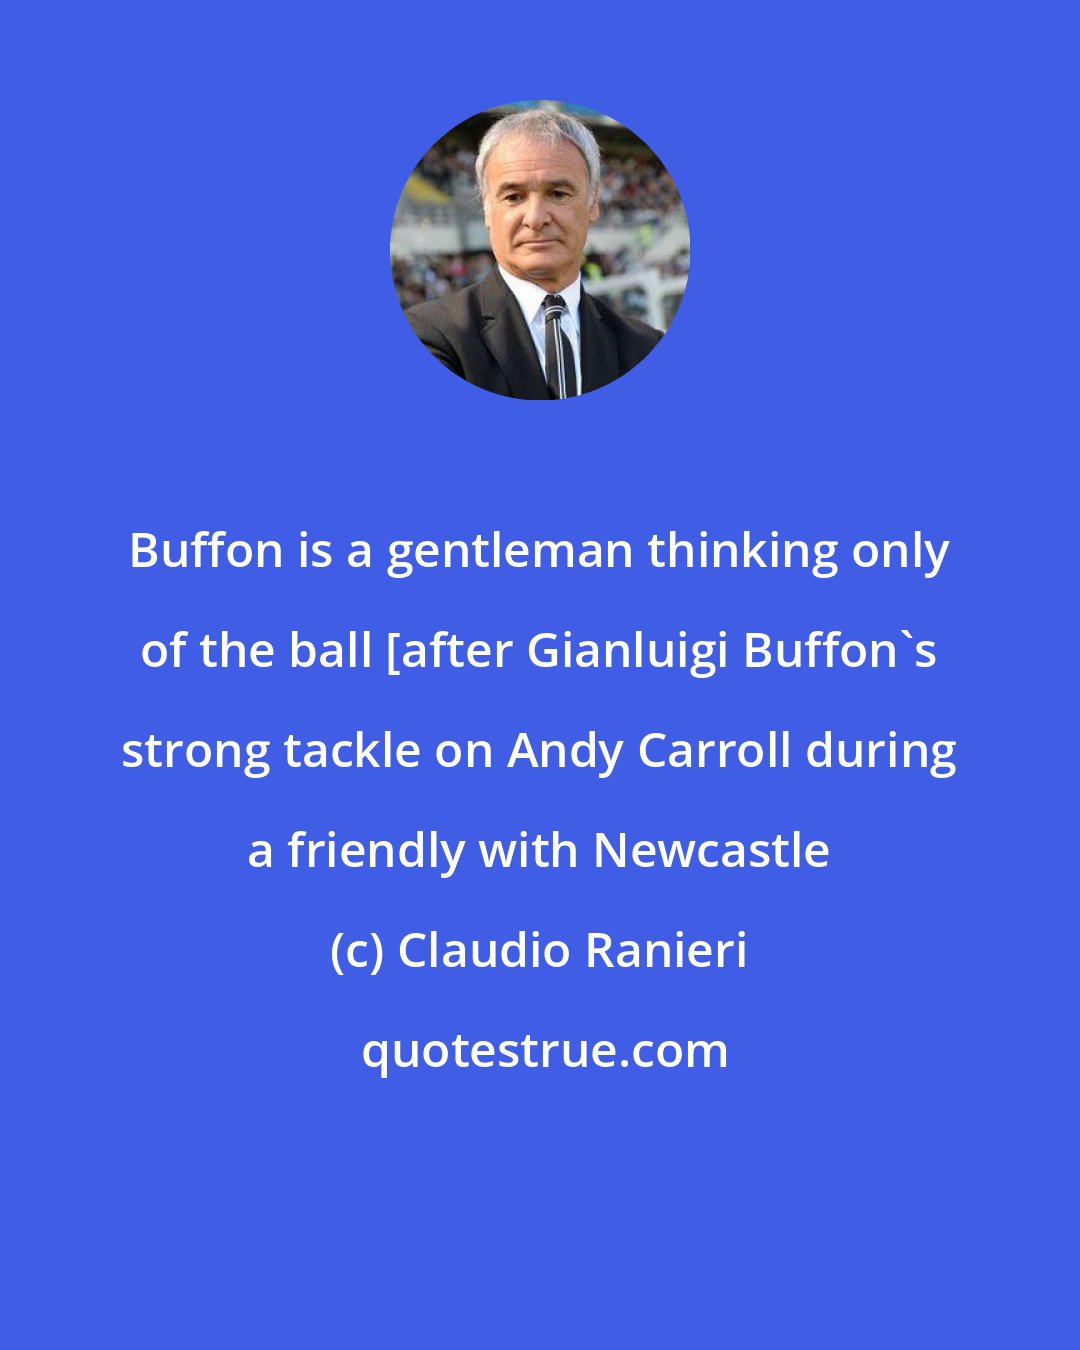 Claudio Ranieri: Buffon is a gentleman thinking only of the ball [after Gianluigi Buffon's strong tackle on Andy Carroll during a friendly with Newcastle